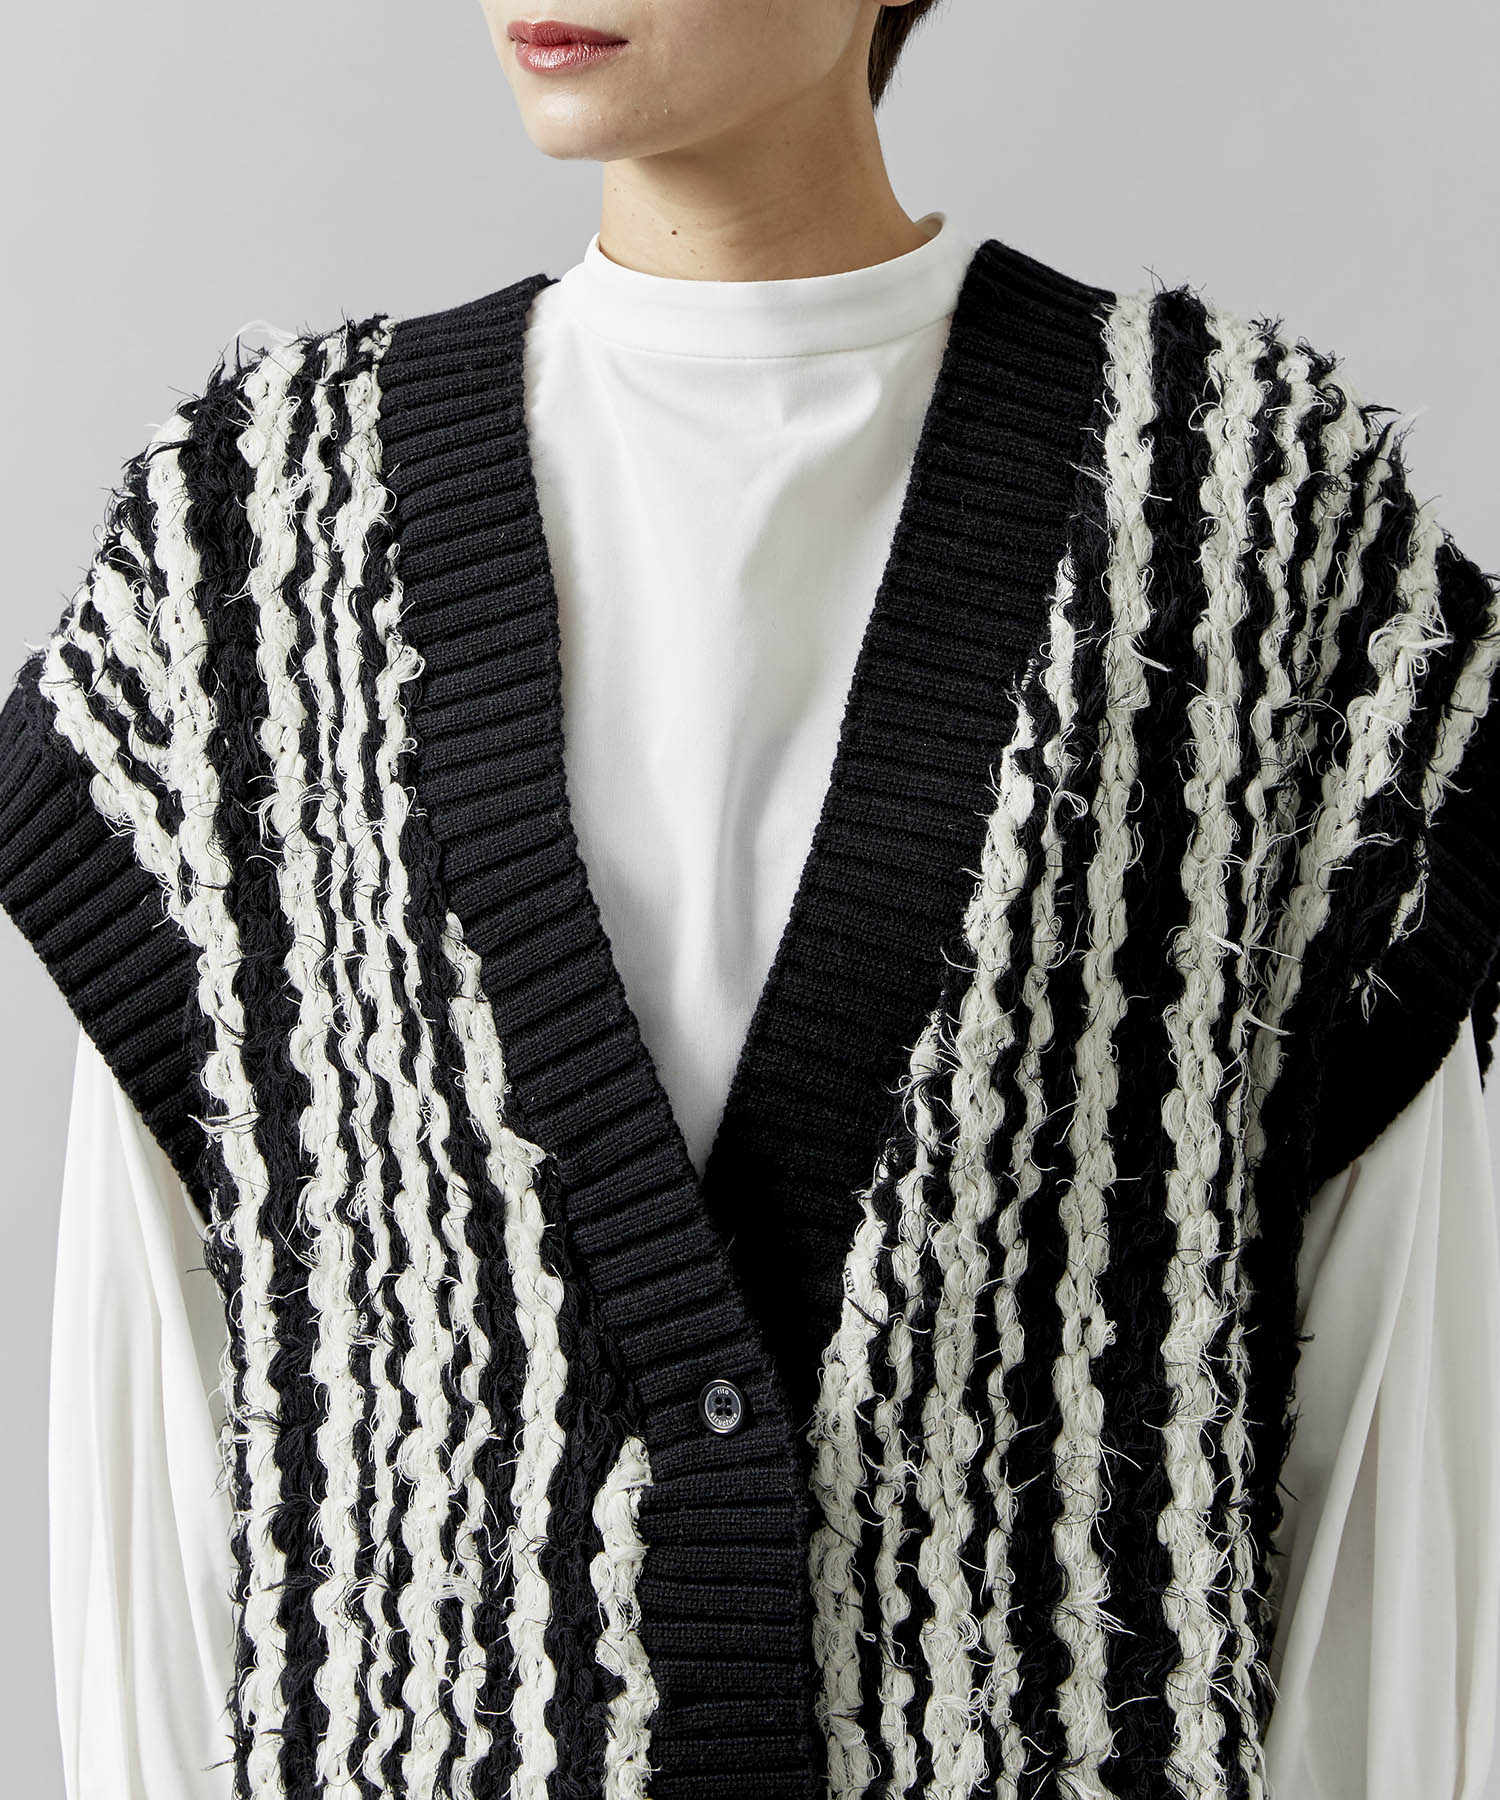 rito structure リトストラクチャー Inlay Knit Vest | shop ...